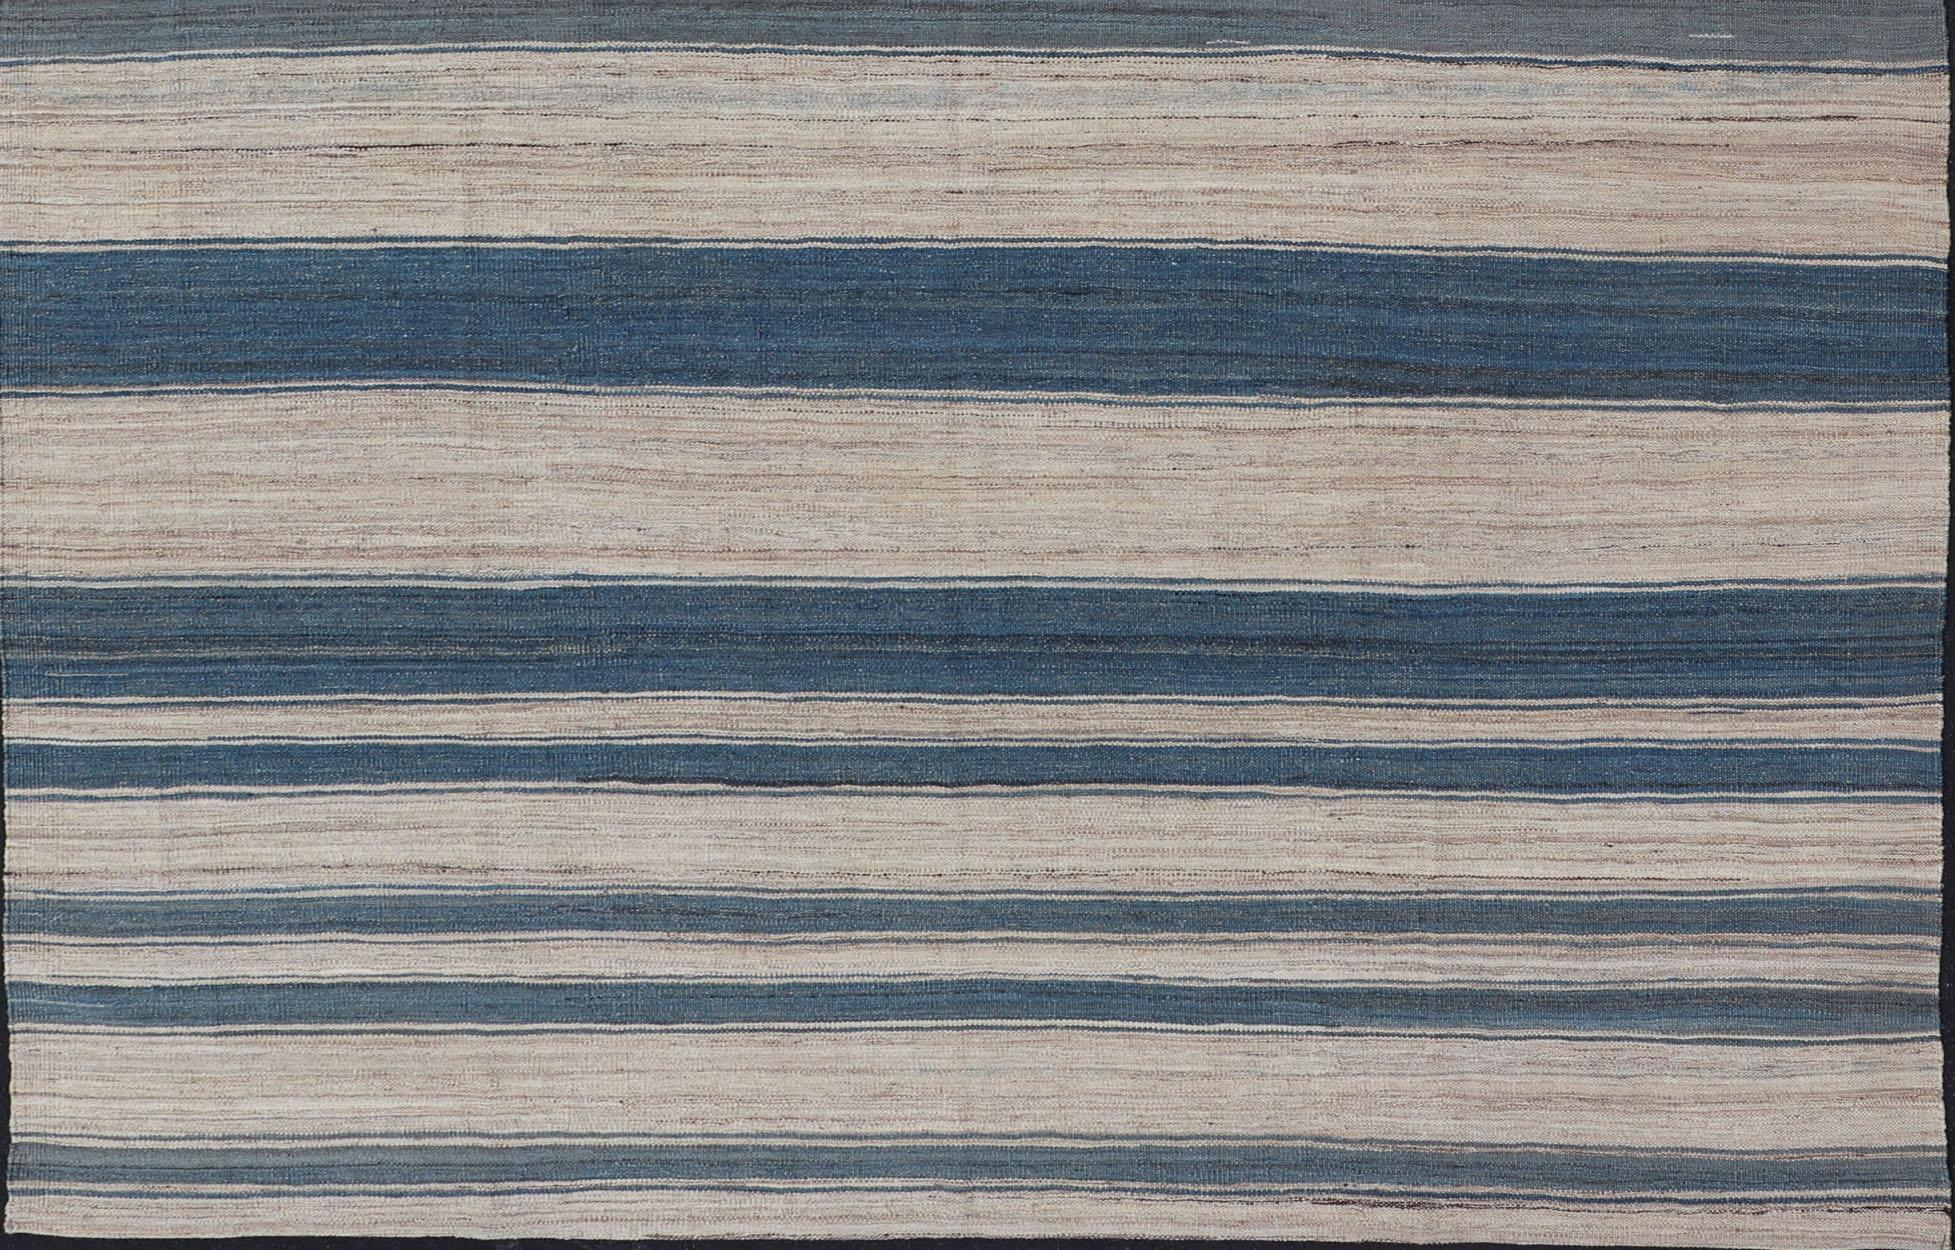 Hand-Woven Flat-Weave Modern Kilim Rug with Stripes in Shades of Blue, and Cream For Sale